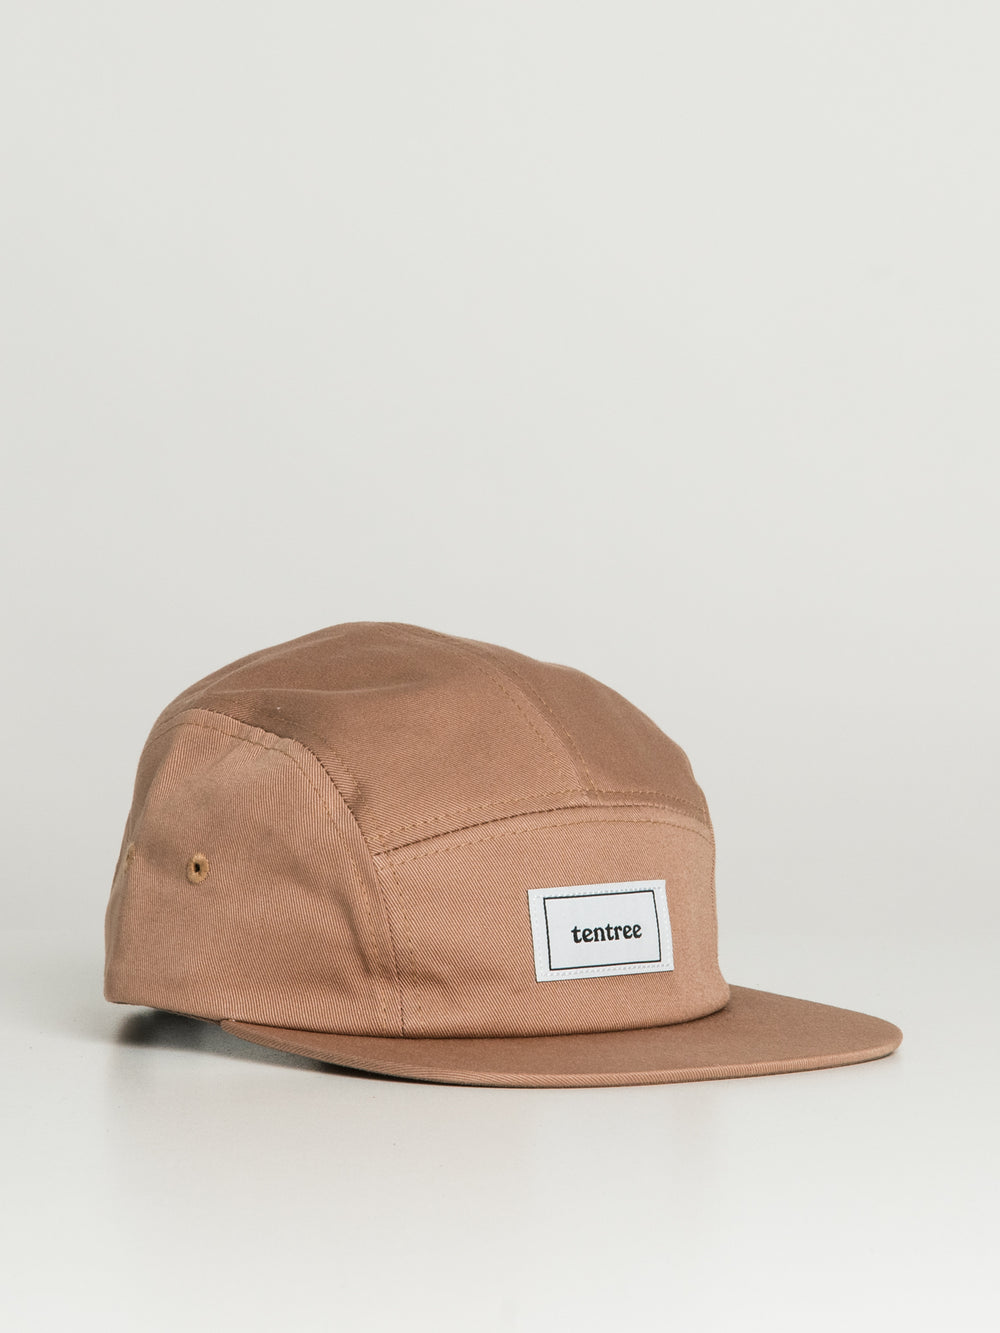 TENTREE ADJUSTABLE 5 PANEL CAMPER TWILL HAT - CLEARANCE